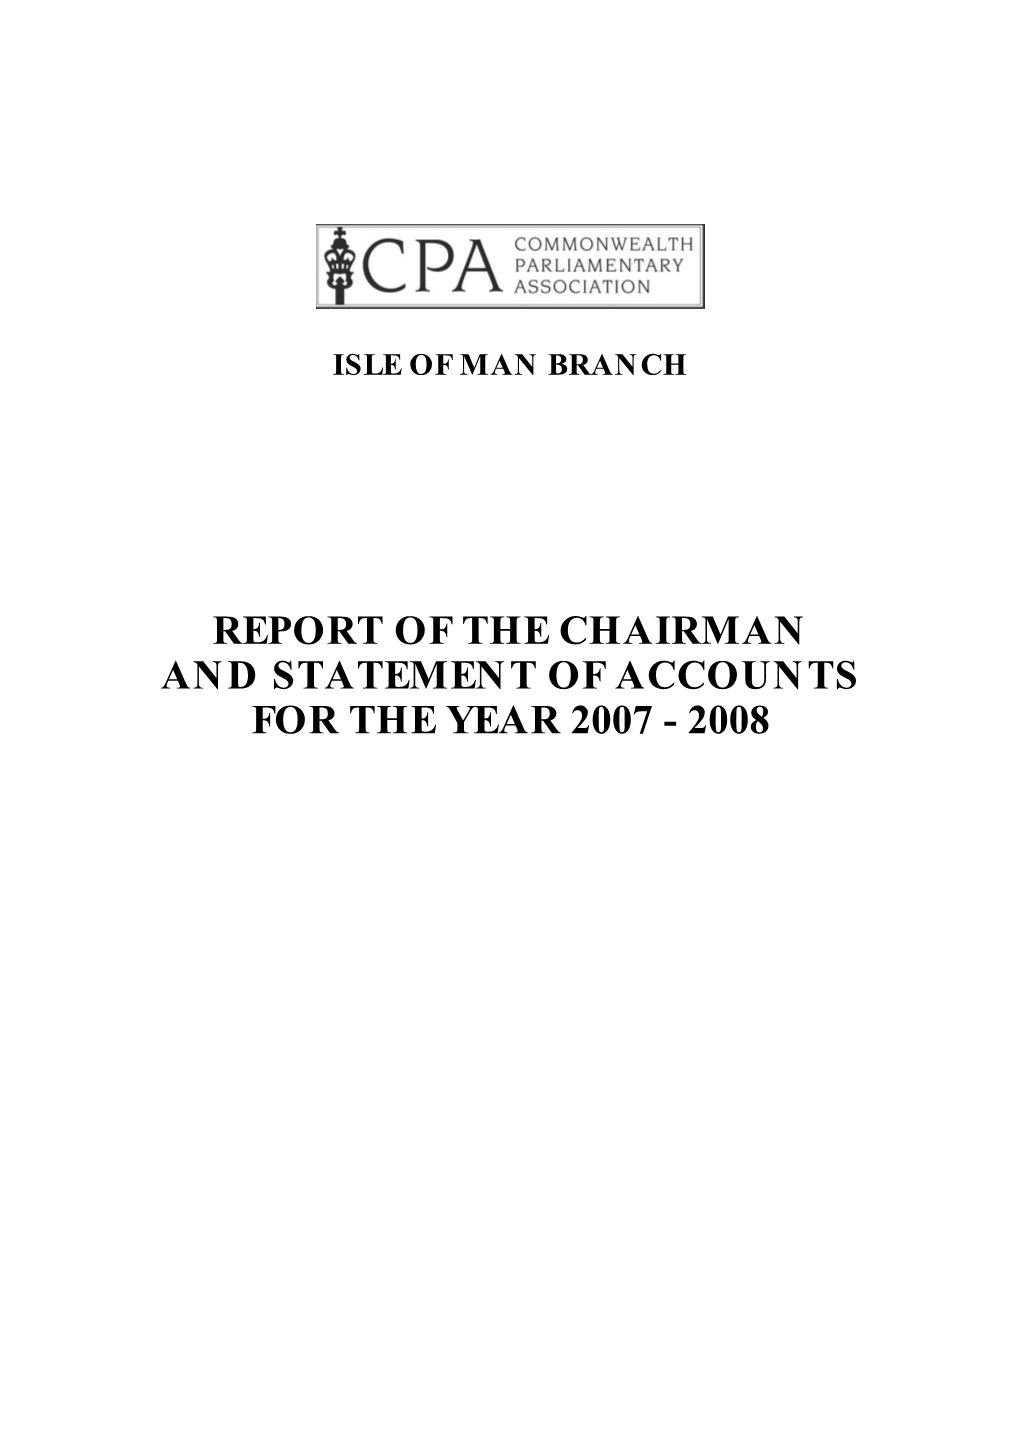 Report of the Chairman and Statement of Accounts for the Year 2007 - 2008